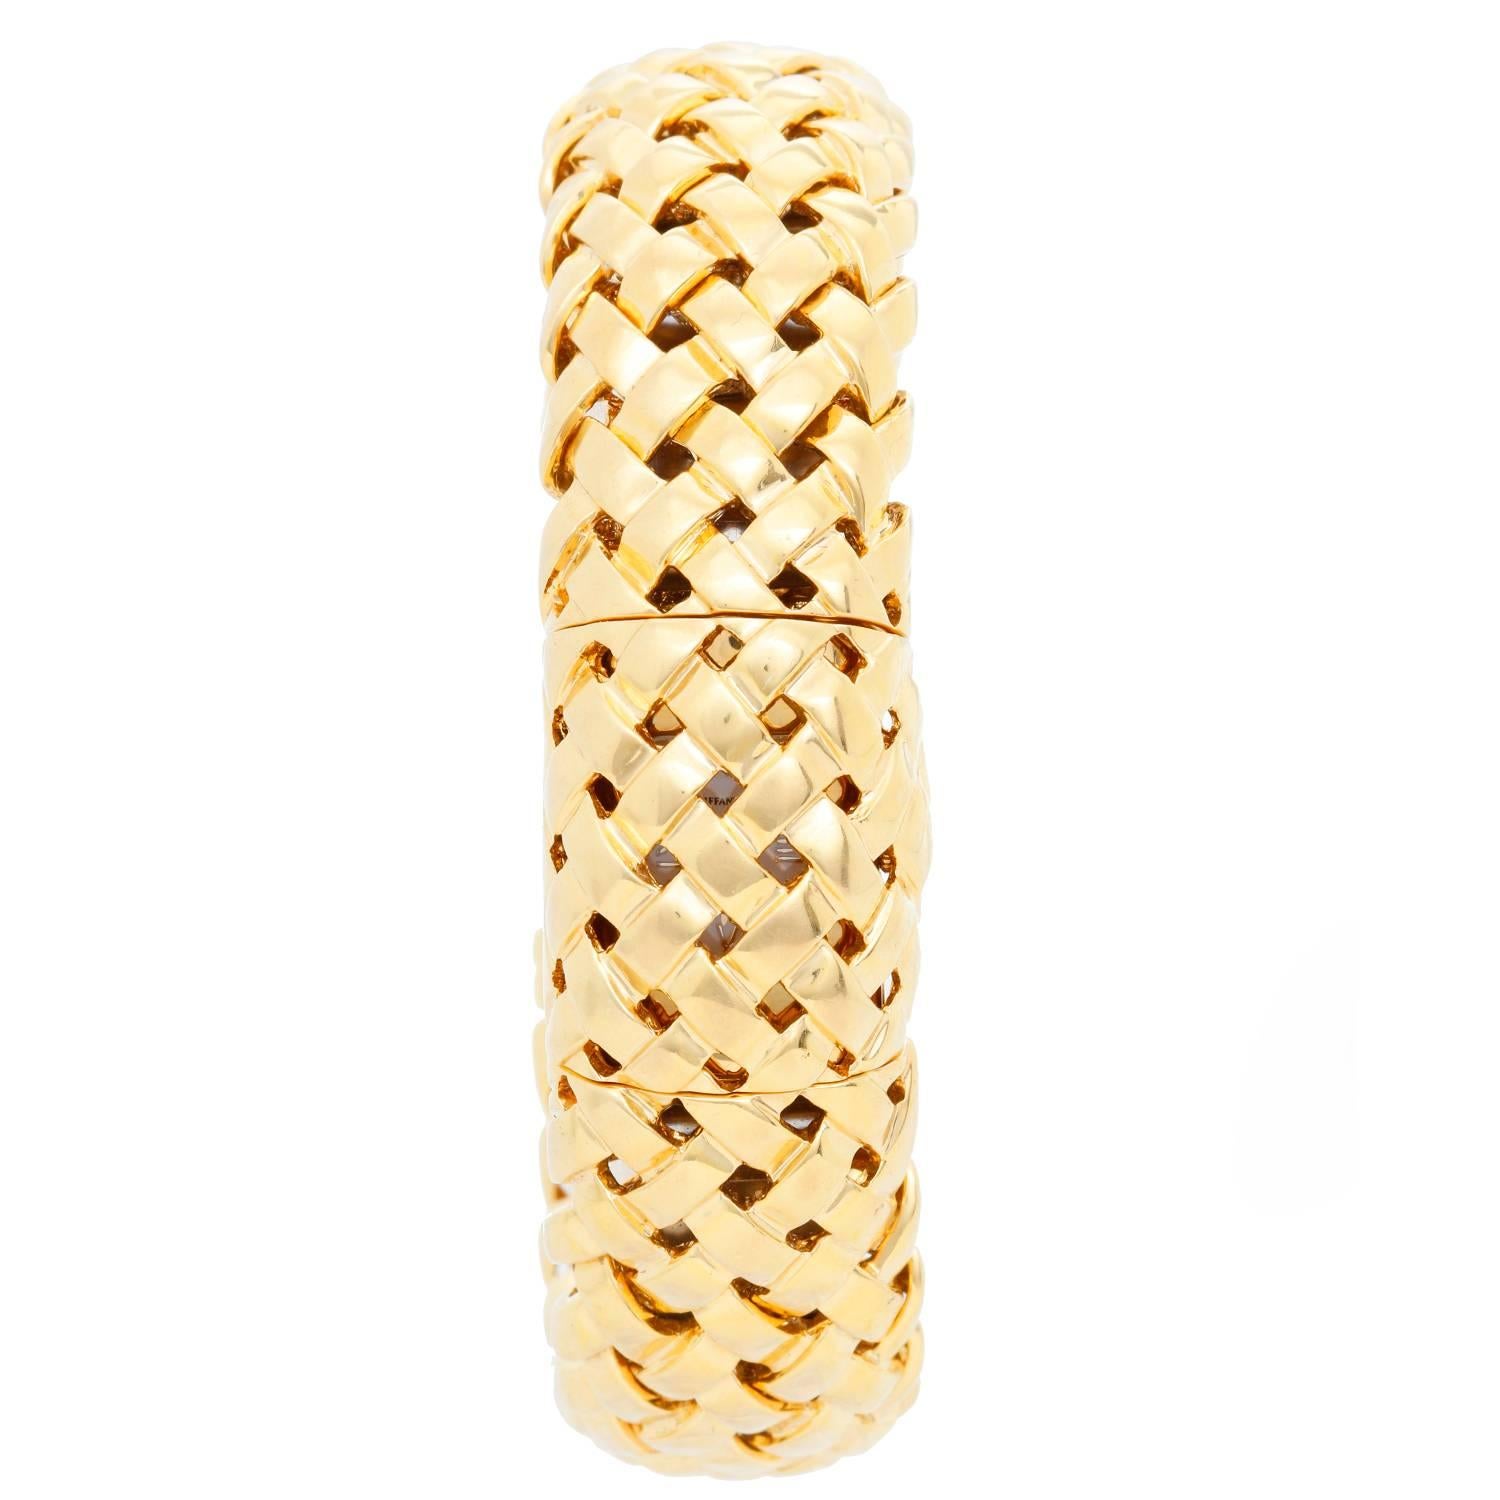 Tiffany & Co. 18K Cuff Yellow Gold Watch -  Quartz. 18K Yellow Gold ( 20 mm ). White dial with Roman numerals at 12, 3, 6, and 9 o'clock. 18K Yellow Gold  Heavy Mesh Cuff  Bracelet. Pre-owned with Tiffany box. Signed Tiffany & Co.